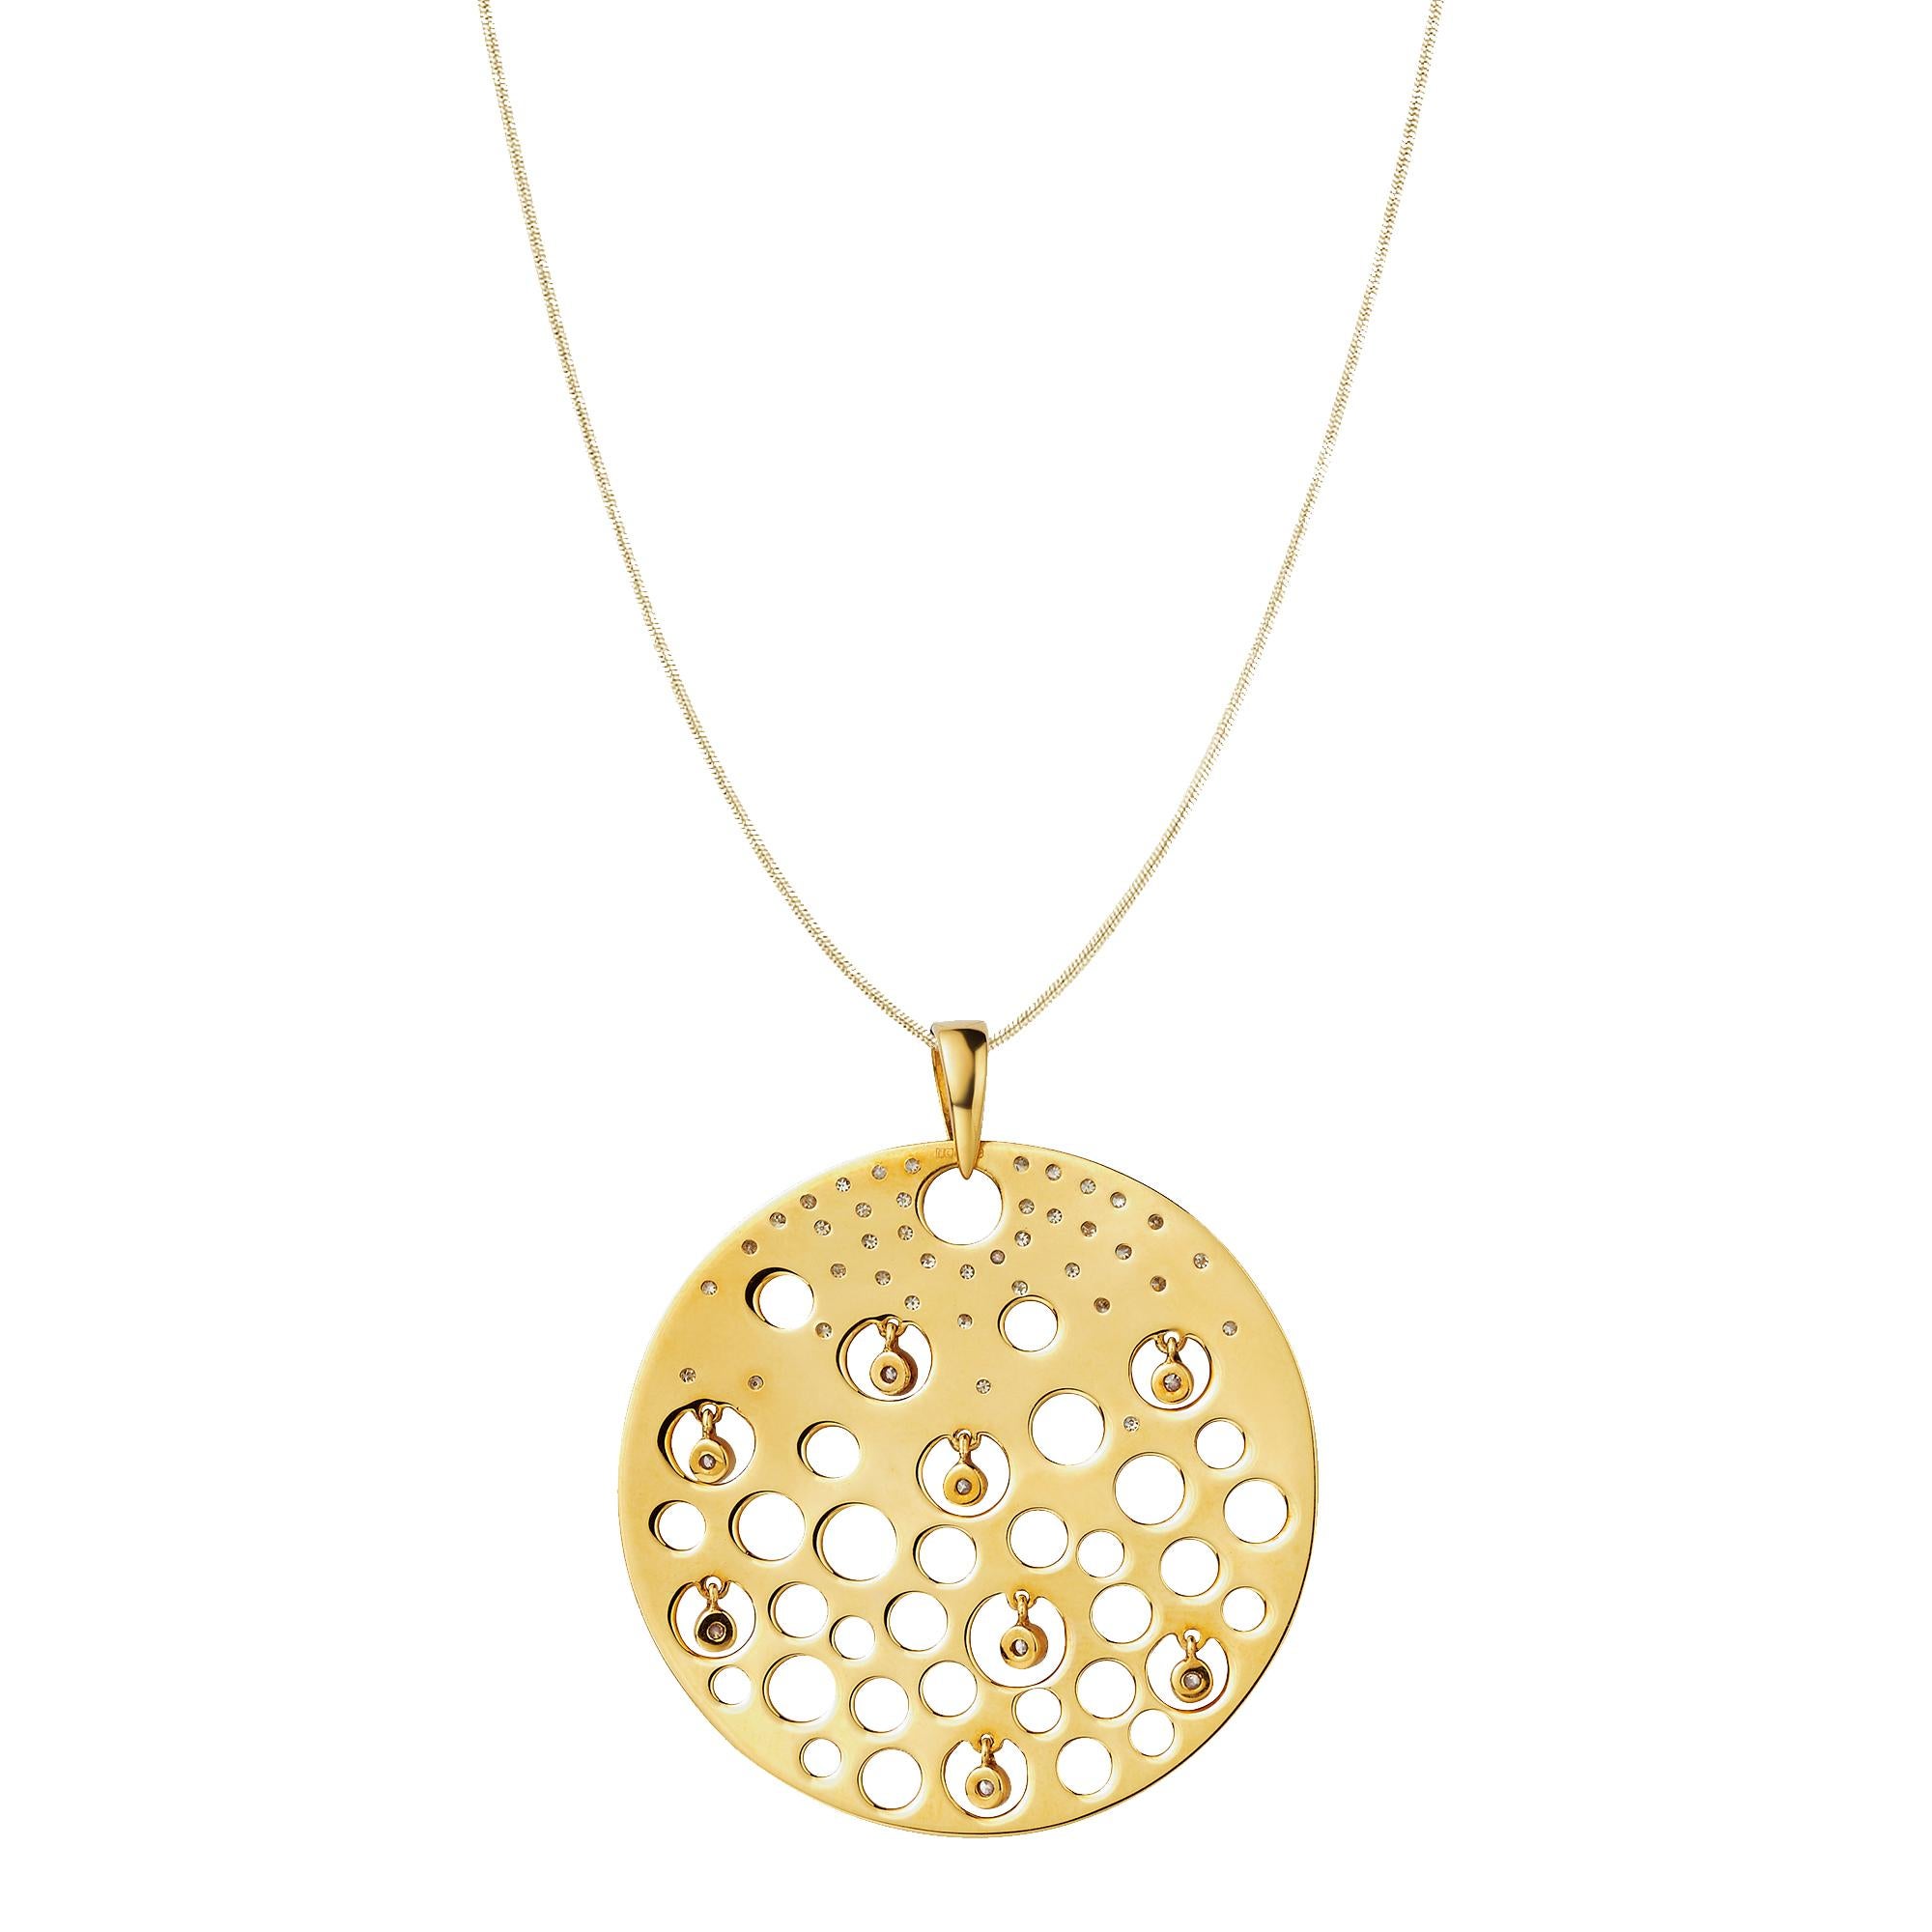 Description:
Drop pendant with 0.24ct-0.4ct white diamonds set in satin-finished 18ct yellow gold. 

Inspiration:
The subtle shimmer of the Drops collection is brought to life when worn, with delicately suspended gemstones forming an illusion of the